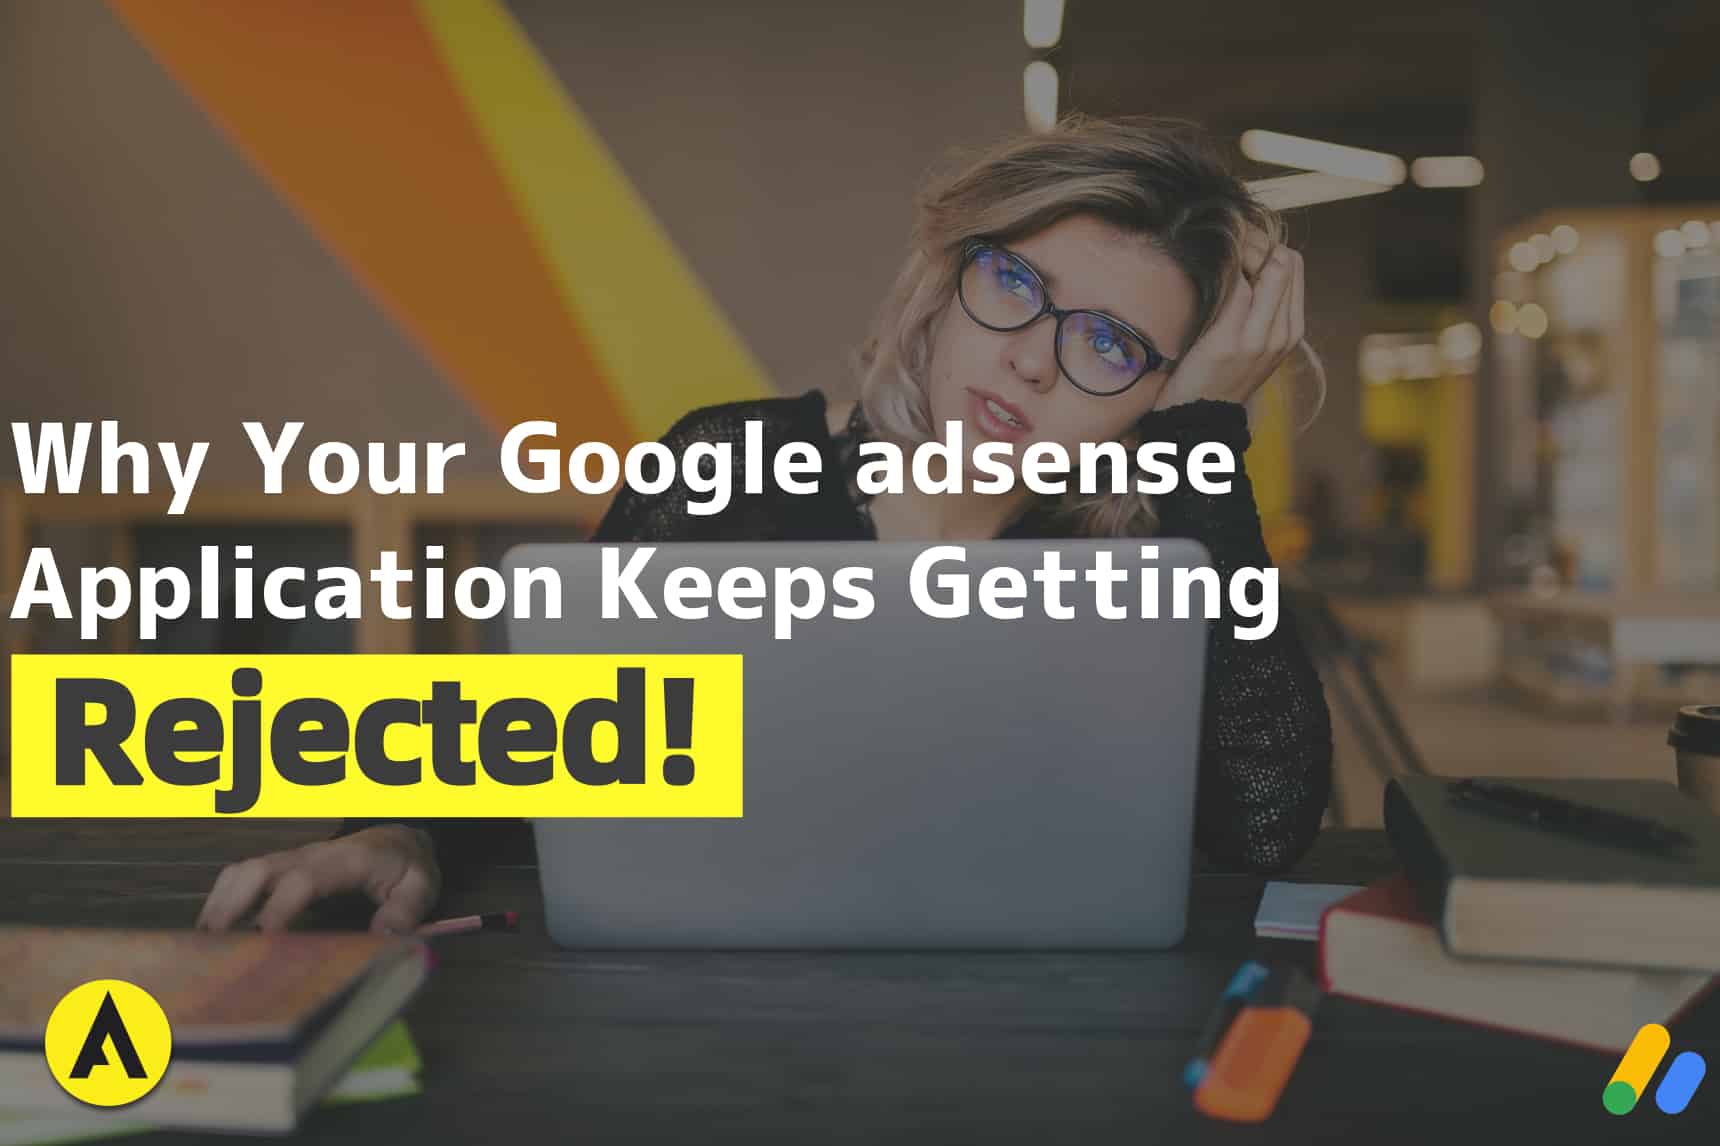 Google Adsense Application Rejected: How to Get Approved! 17